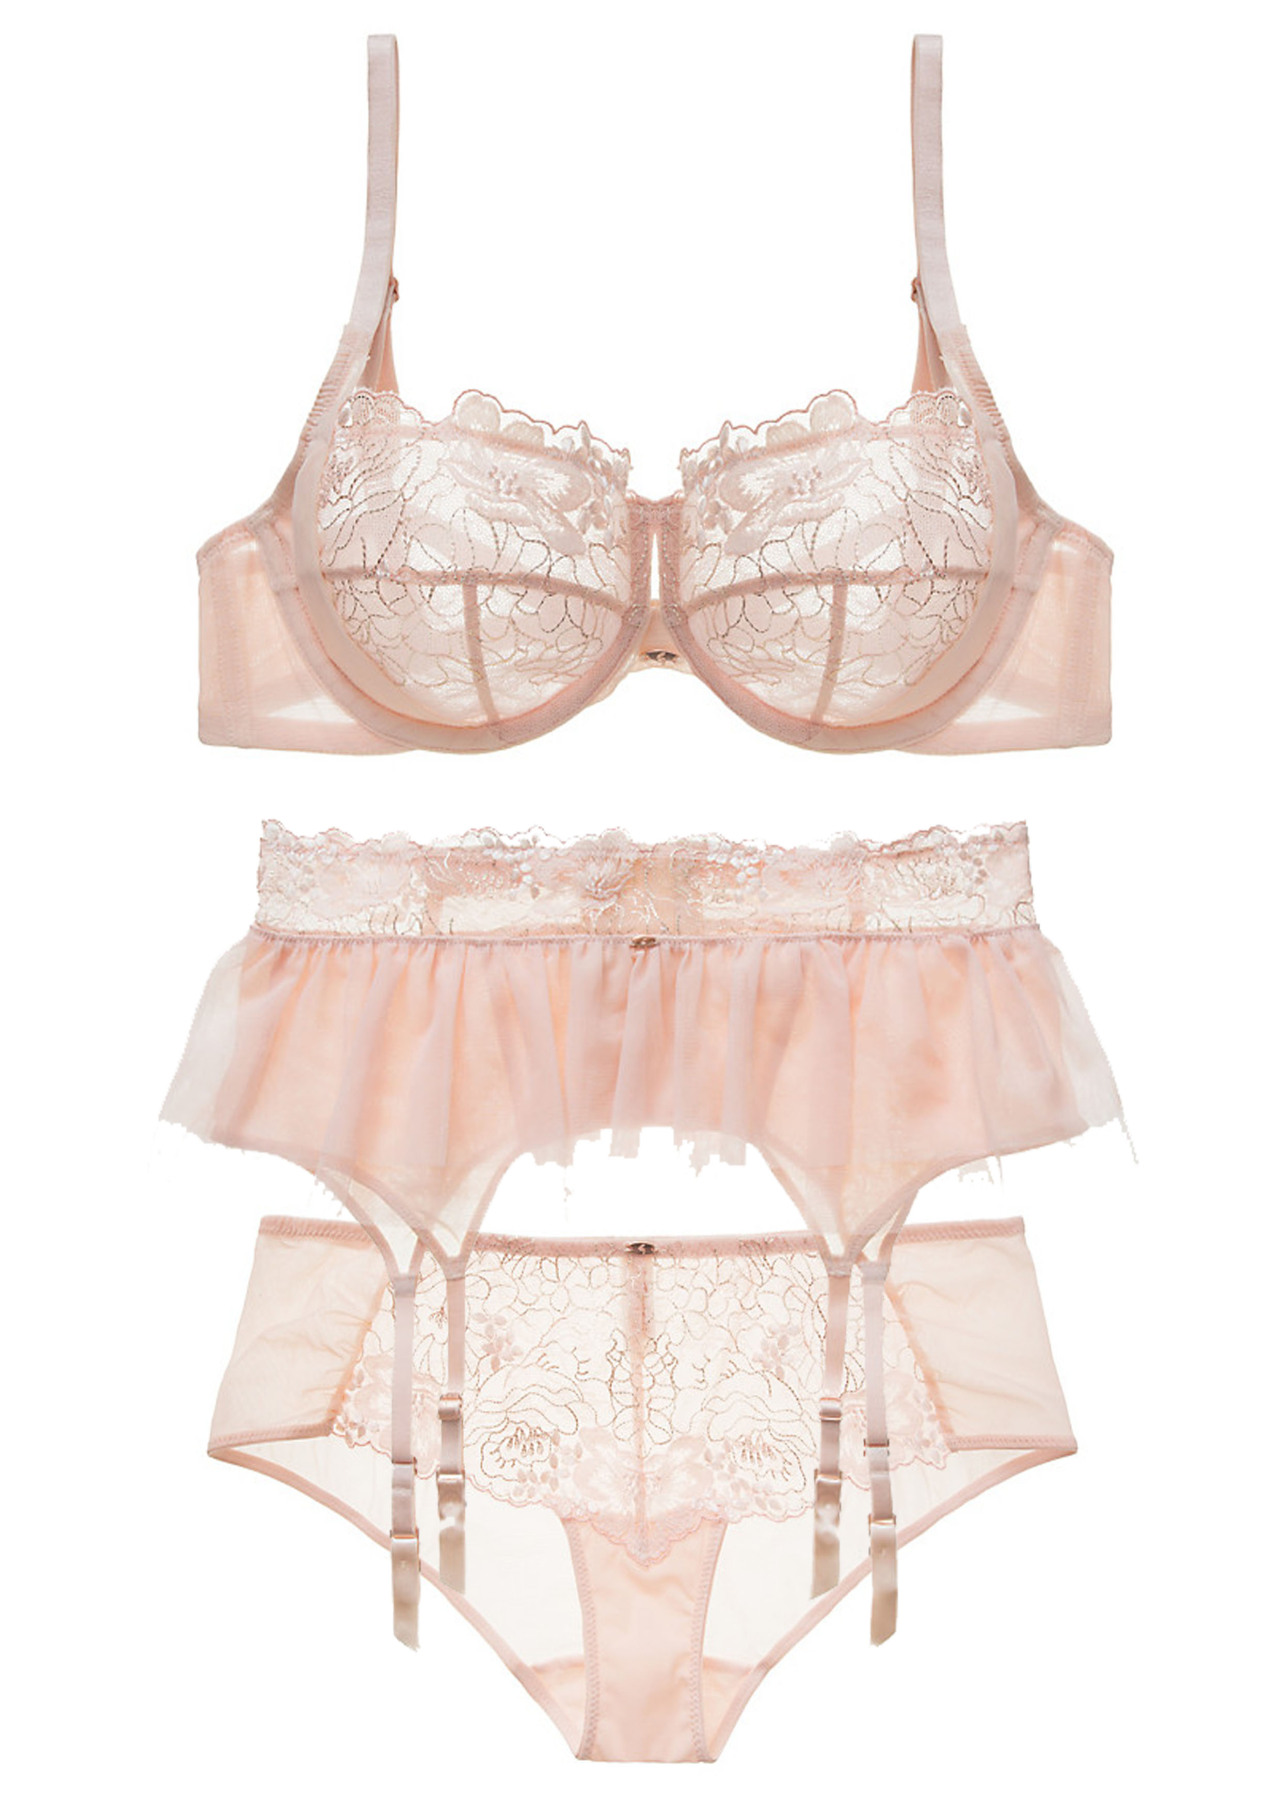 placedeladentelle:  Phoebe by Gossard / 30-38 A-G / Please don’t remove the credits!